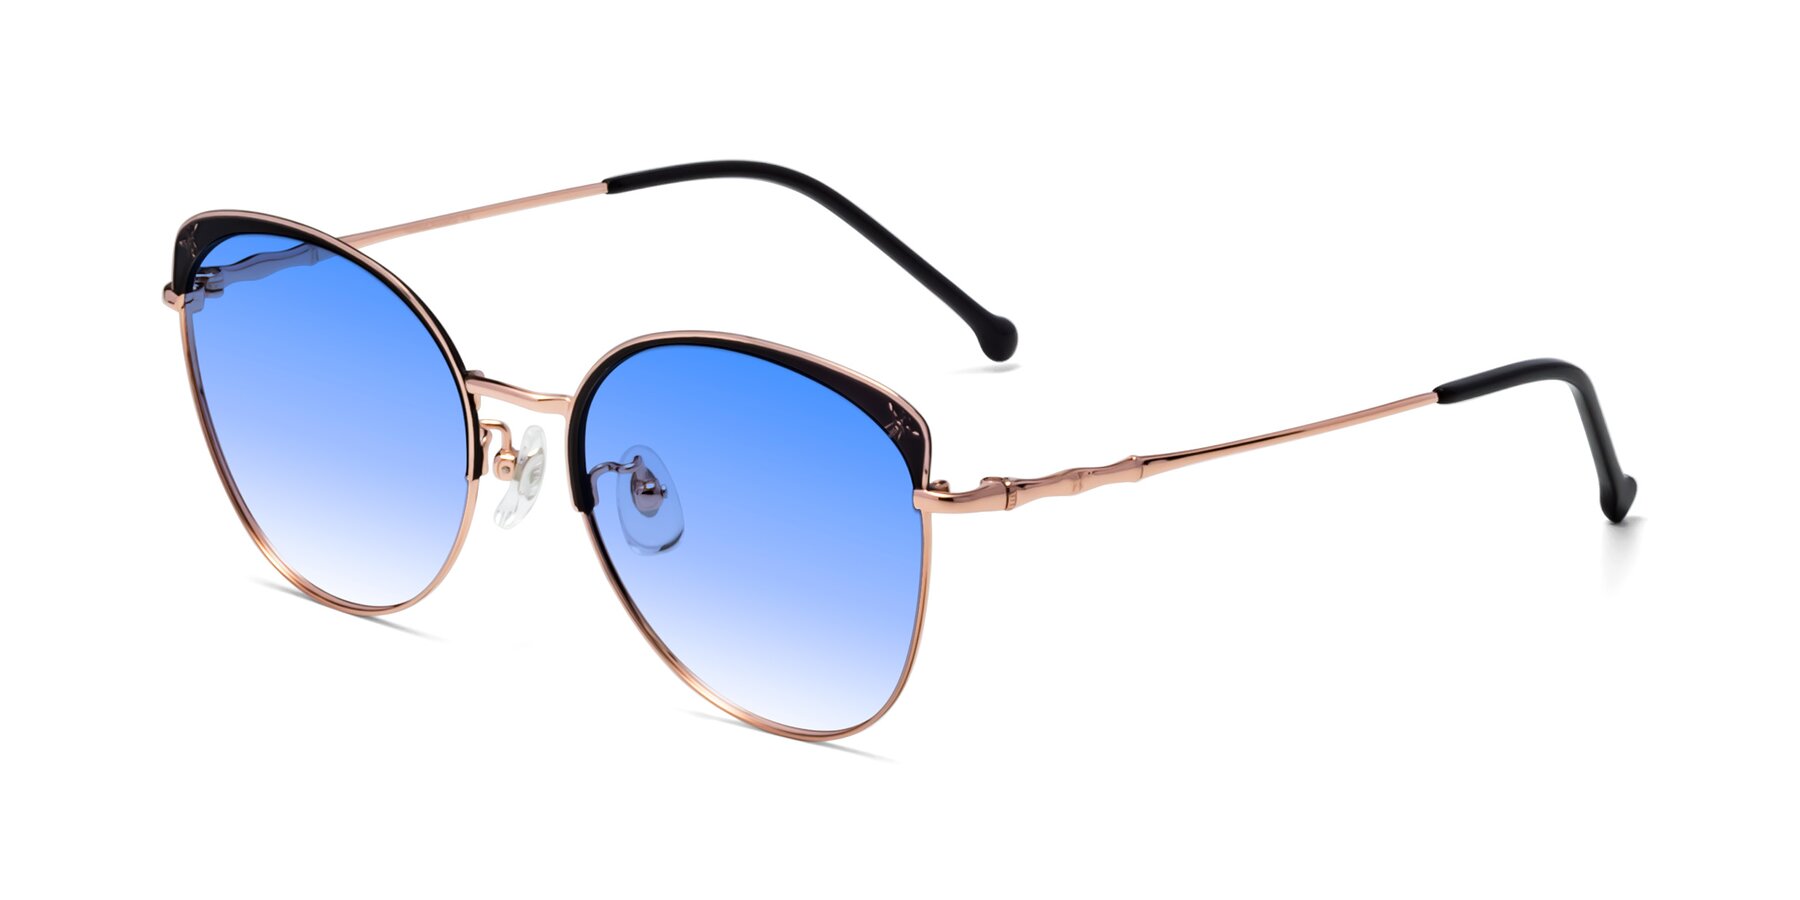 Angle of 18019 in Black-Rose Gold with Blue Gradient Lenses